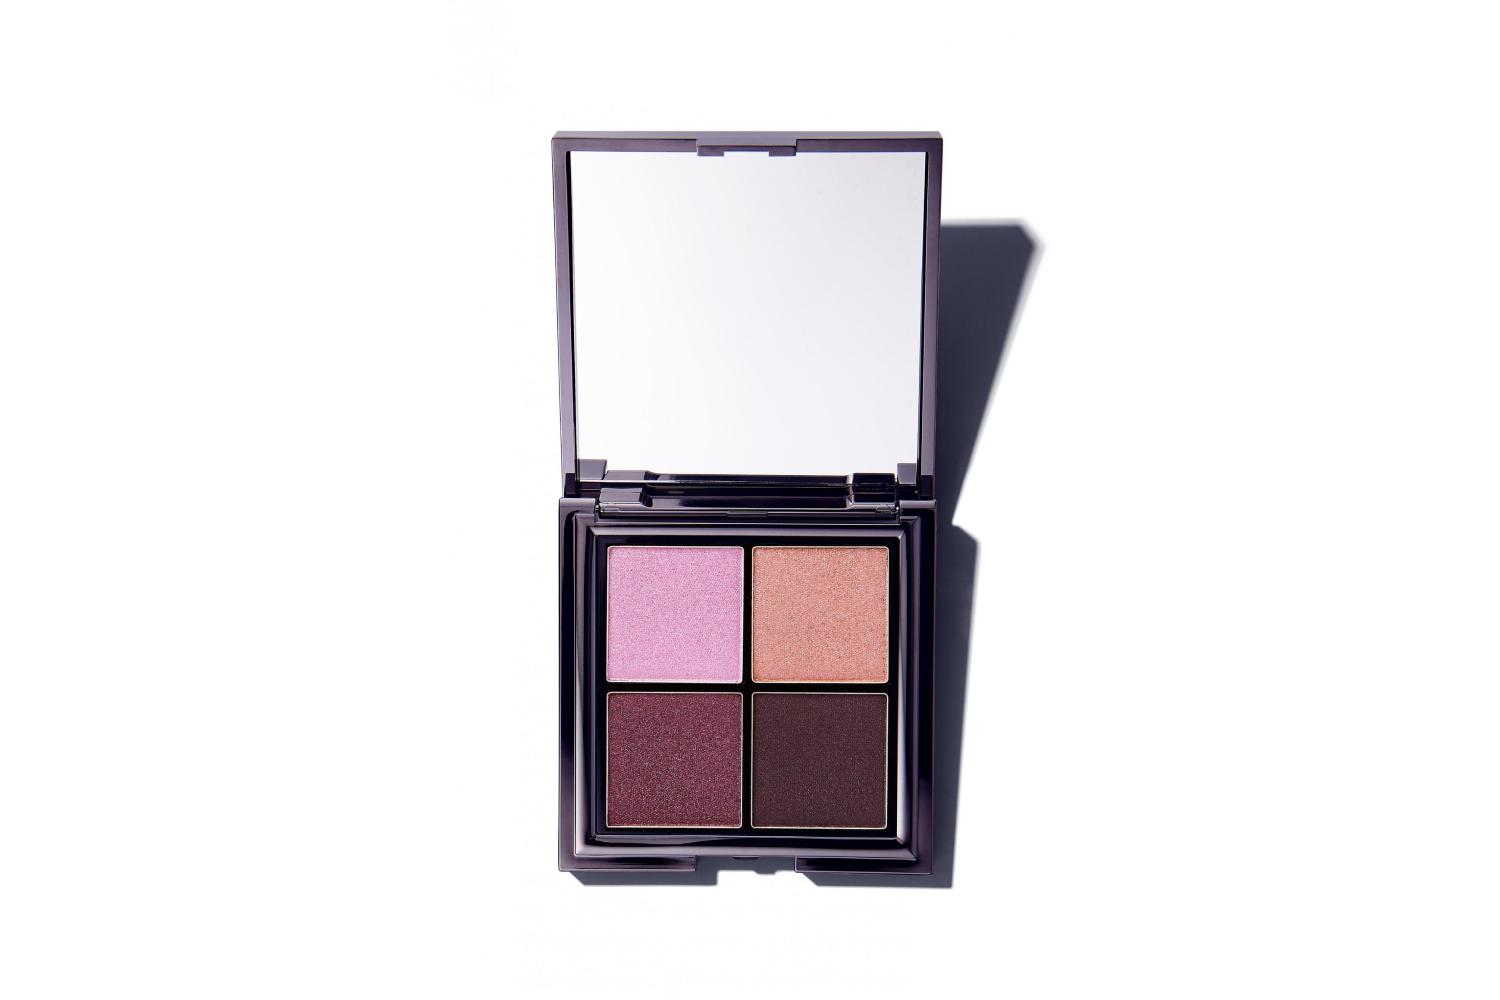 Палетка теней Your vision palette cold blooded, Annbeauty, 3900 руб. (annbeautystore.ru)